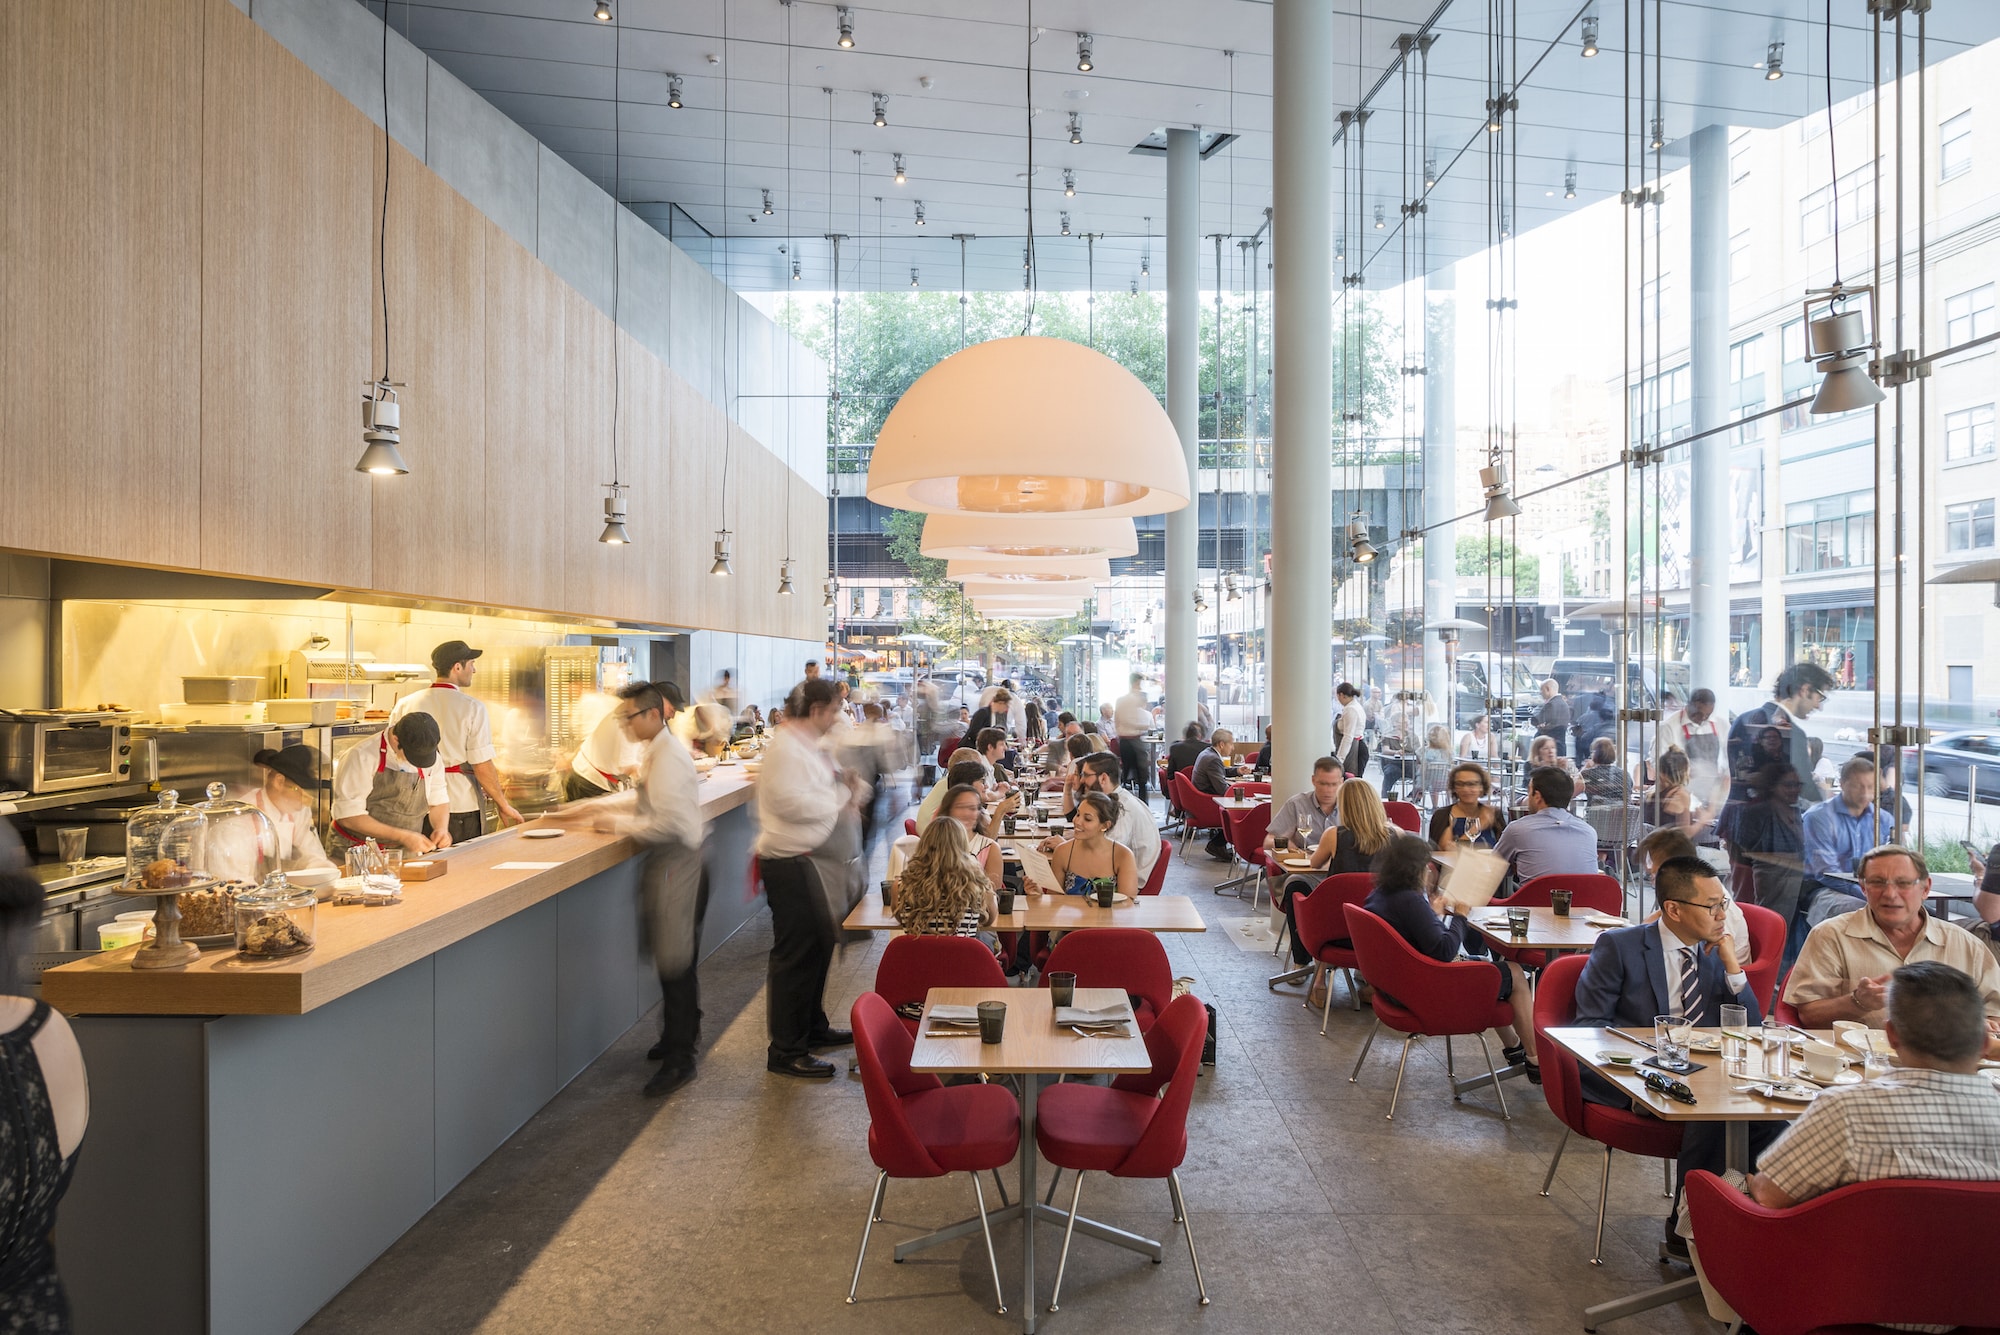 5 Danny Meyer Restaurants with Notable Decor (Shake Shack Is One)